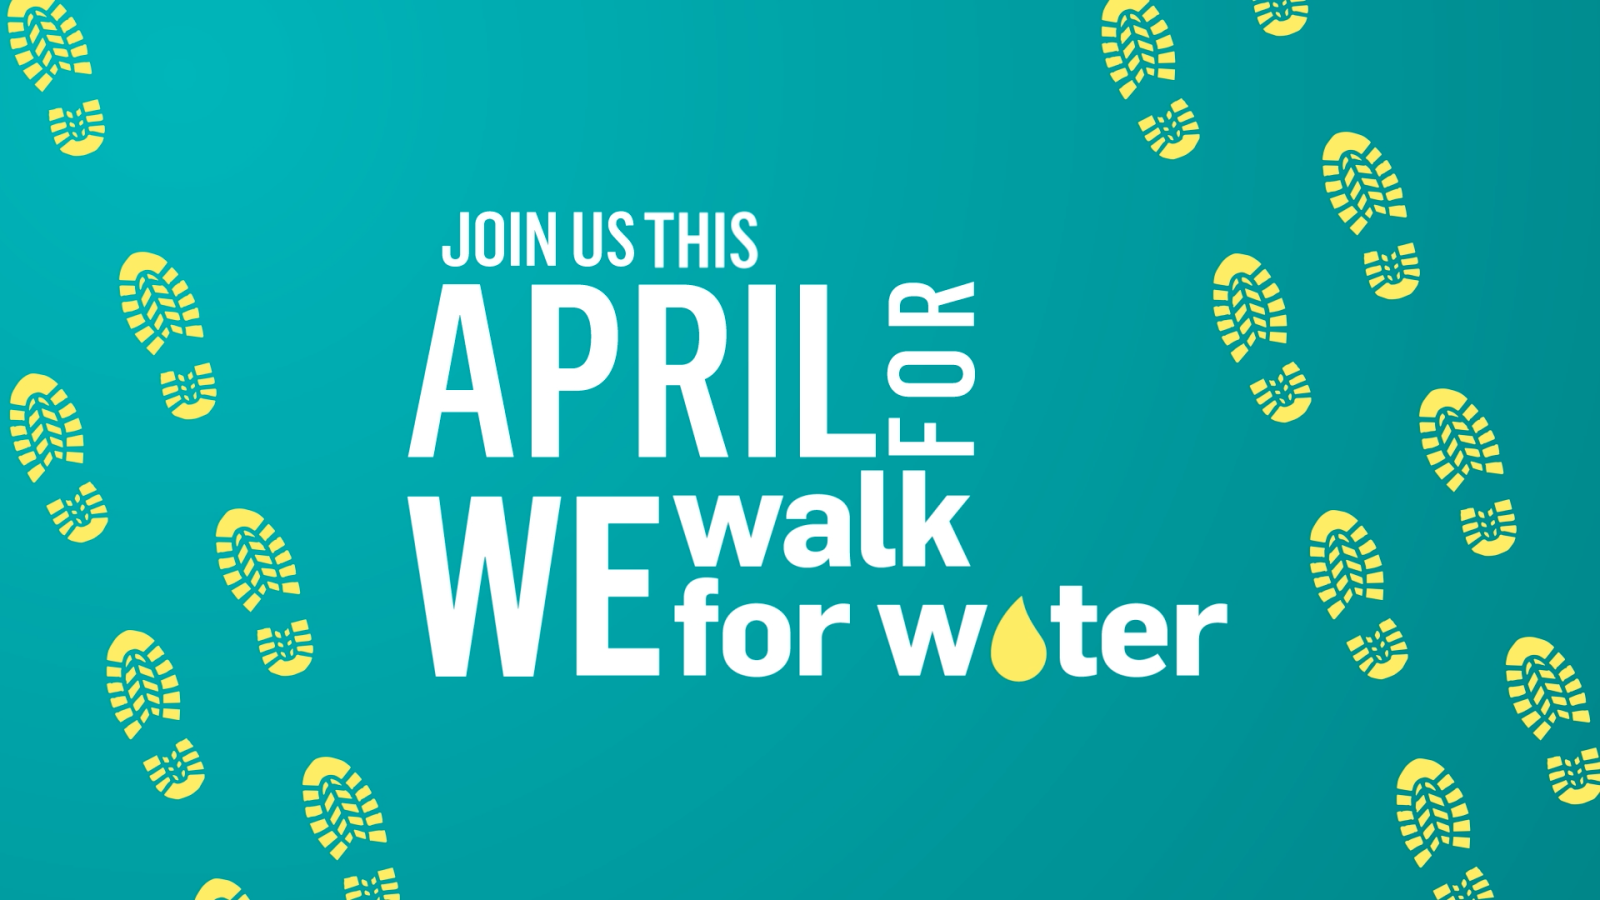 We Walk for Water campaign